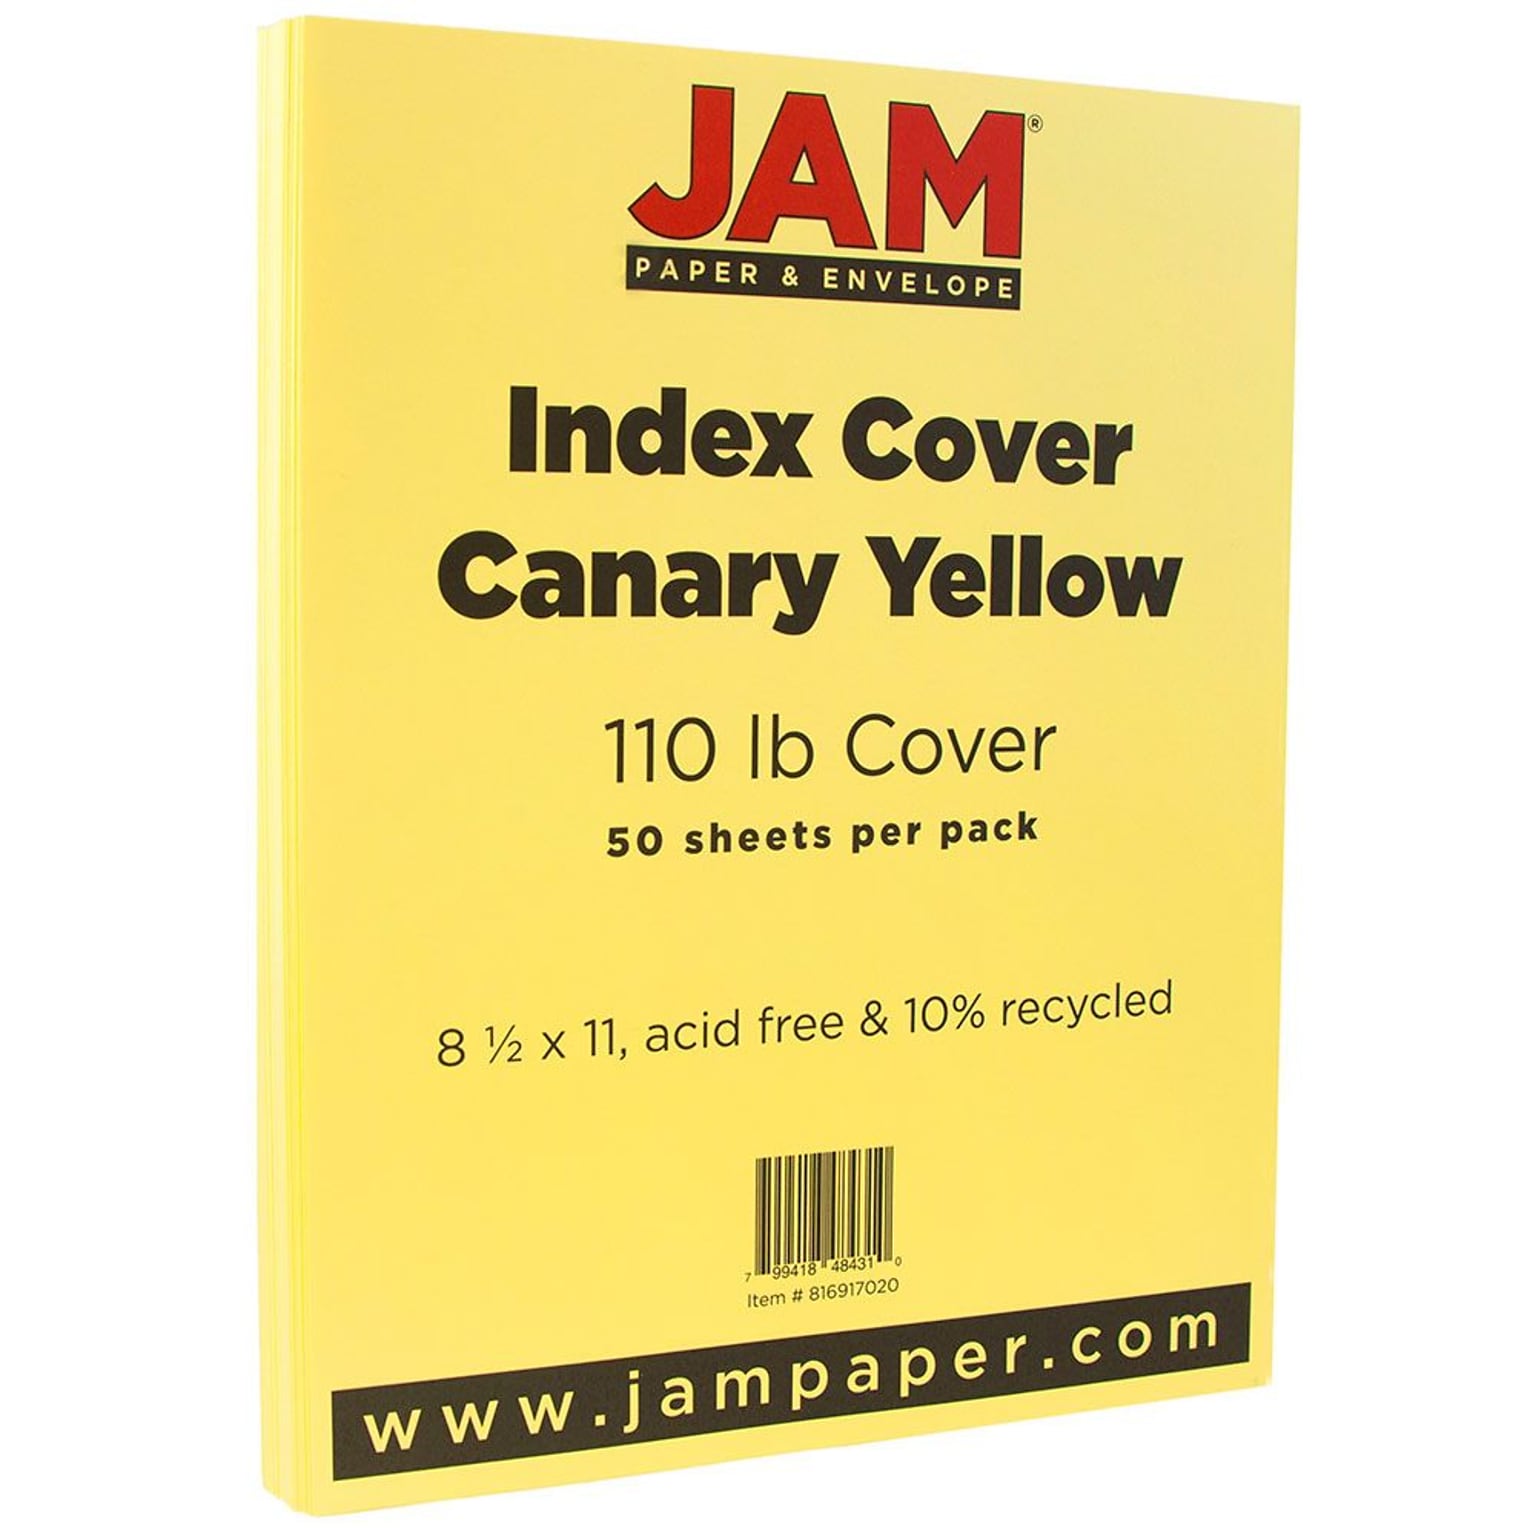 JAM Paper Vellum Bristol 110 lb. Cardstock Paper, 8.5 x 11, Canary Yellow, 50 Sheets/Pack (816917020)